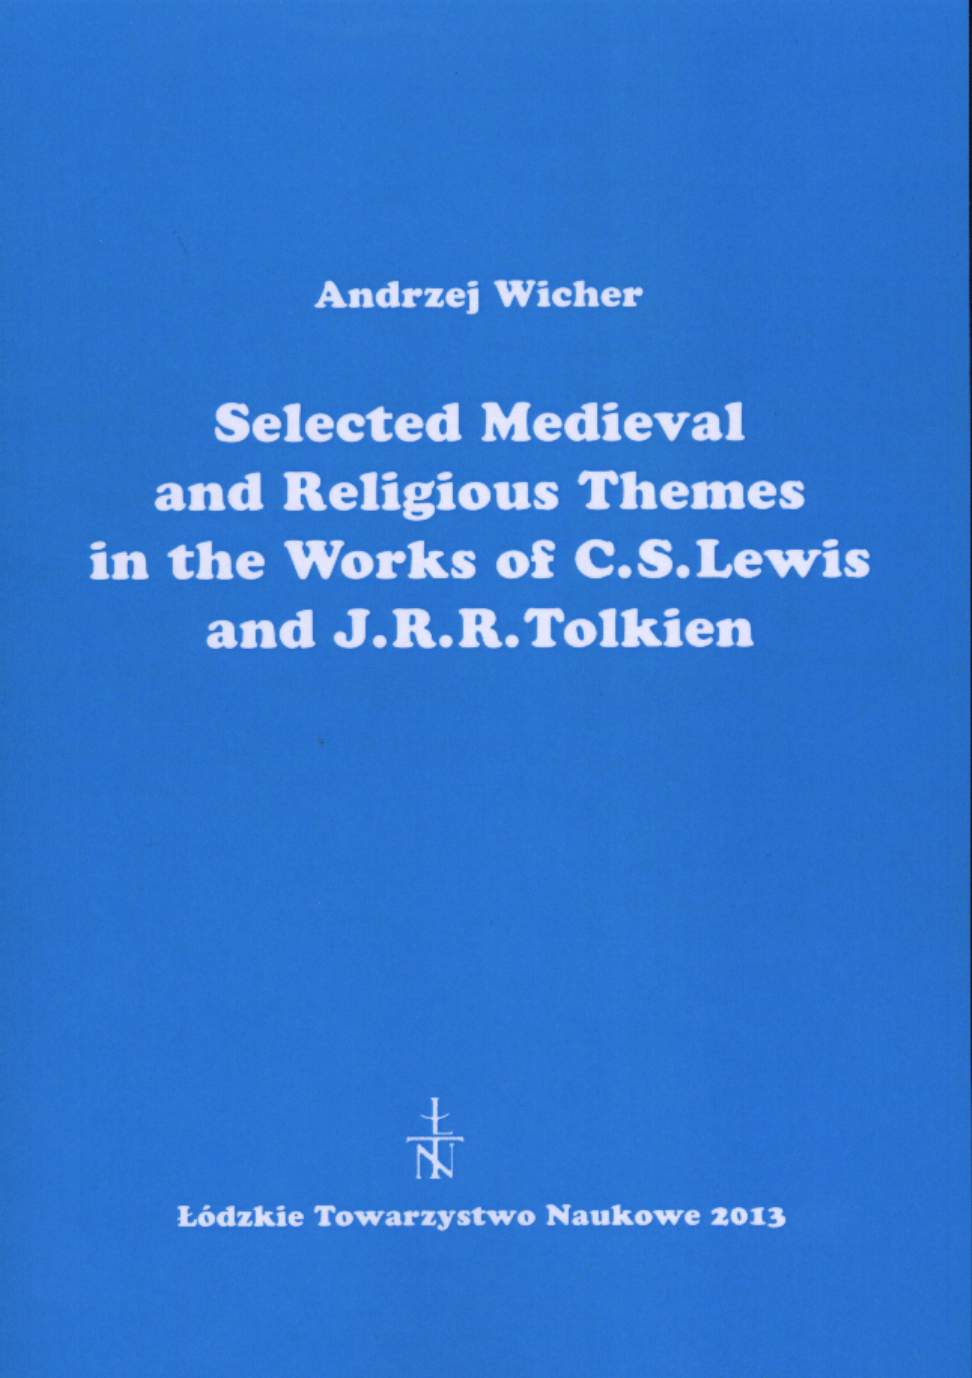 Selected Medieval and Religious Themes in the Works of C. S. Lewis and J. R. R. Tolkien